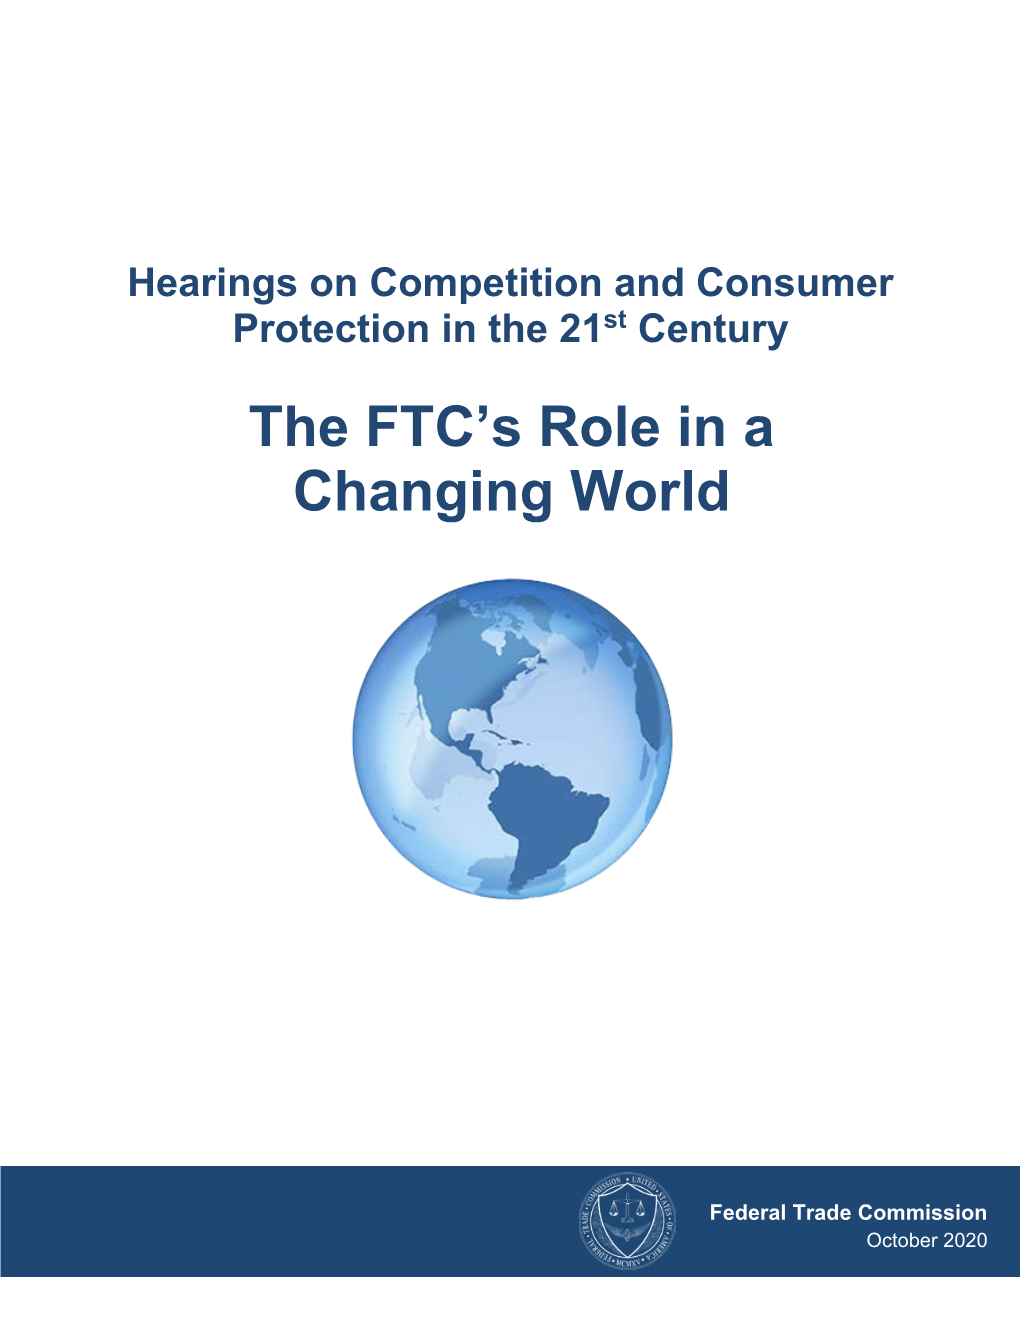 Commission Report on Hearings on Competition and Consumer